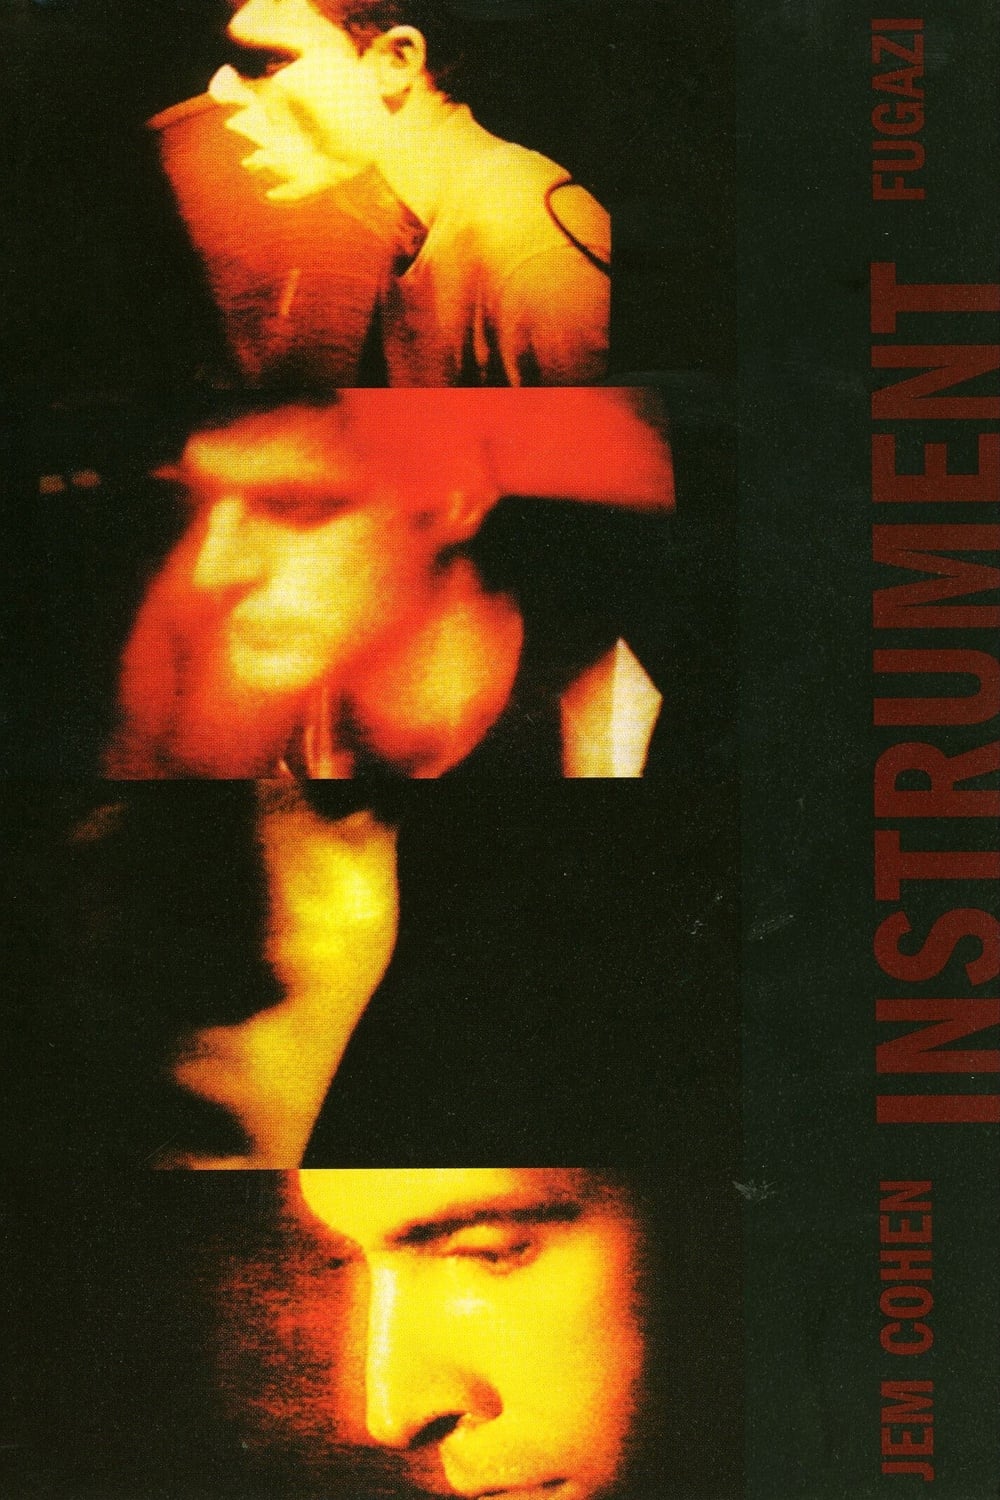 Instrument: Ten Years with the Band Fugazi streaming sur zone telechargement